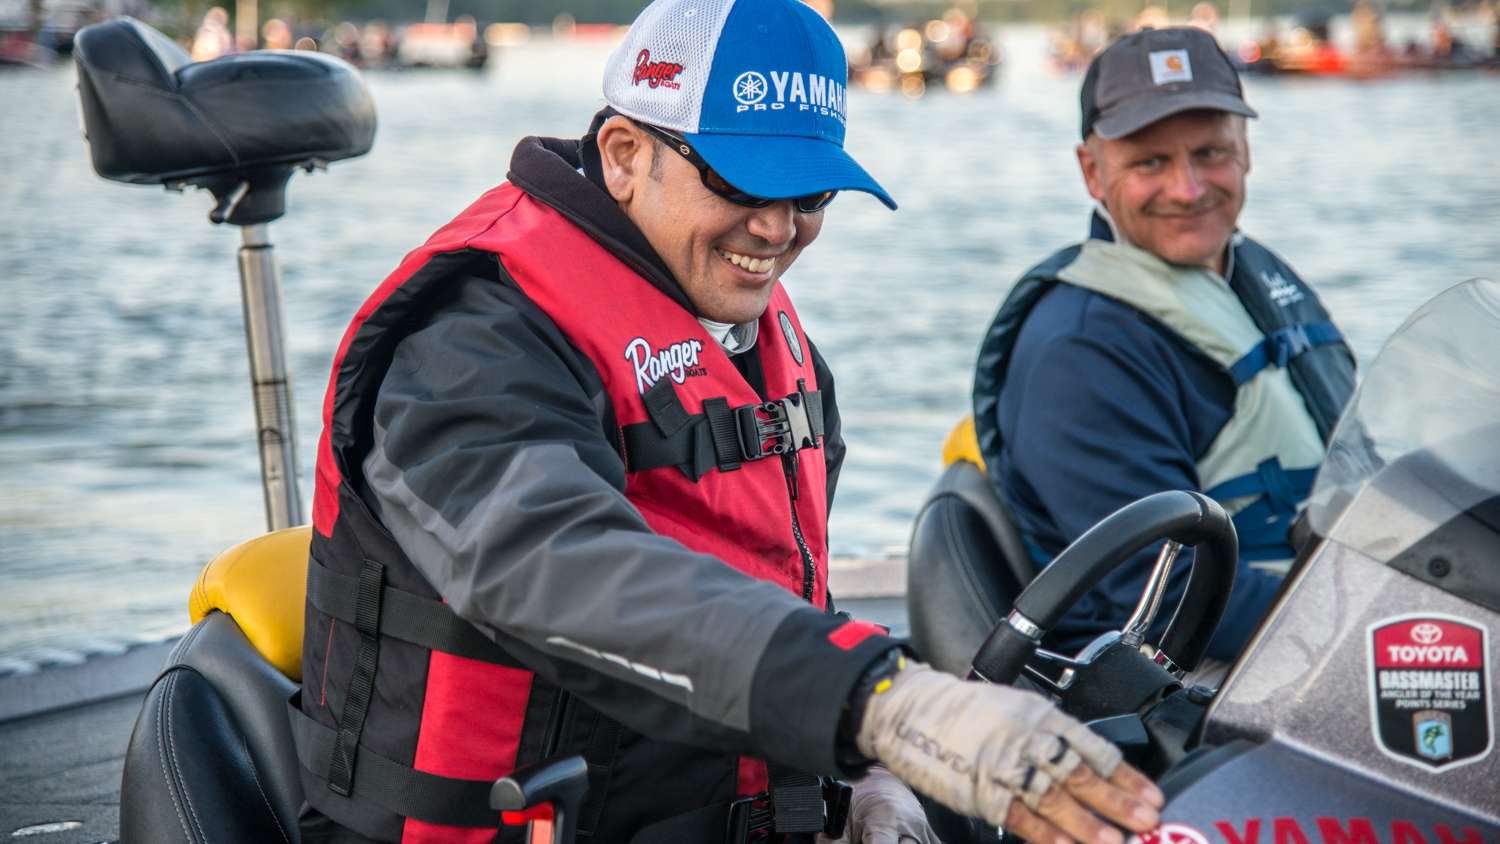 Then a big smile from James Niggemeyer! Stay tuned for some of the best fishing of the season from Cayuga Lake, Union Springs NY! 